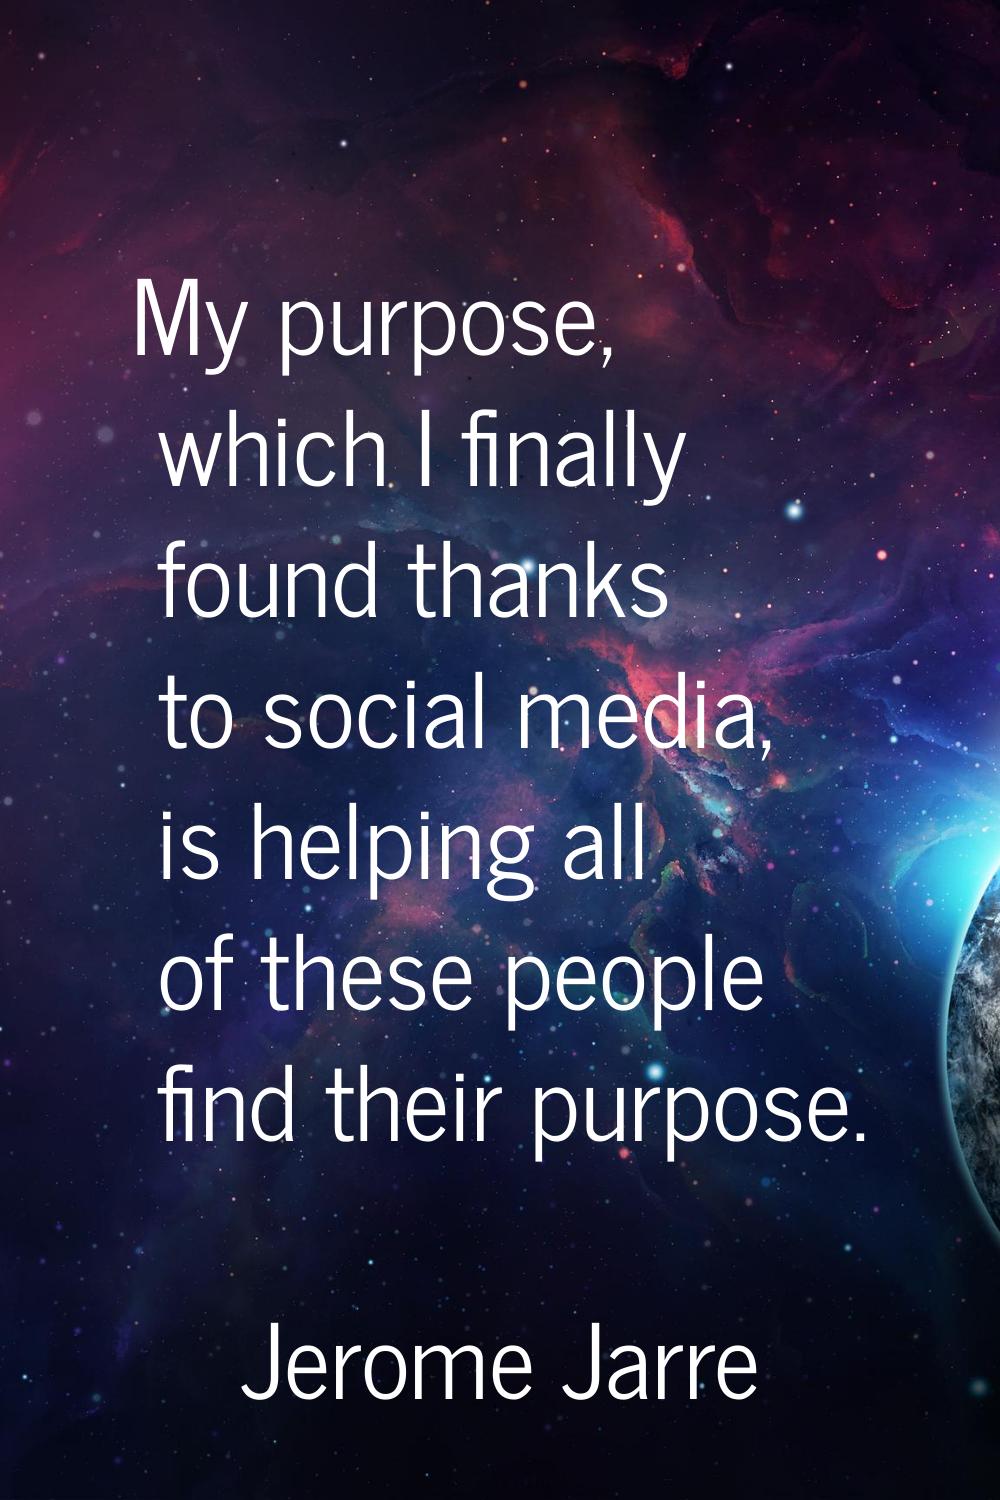 My purpose, which I finally found thanks to social media, is helping all of these people find their